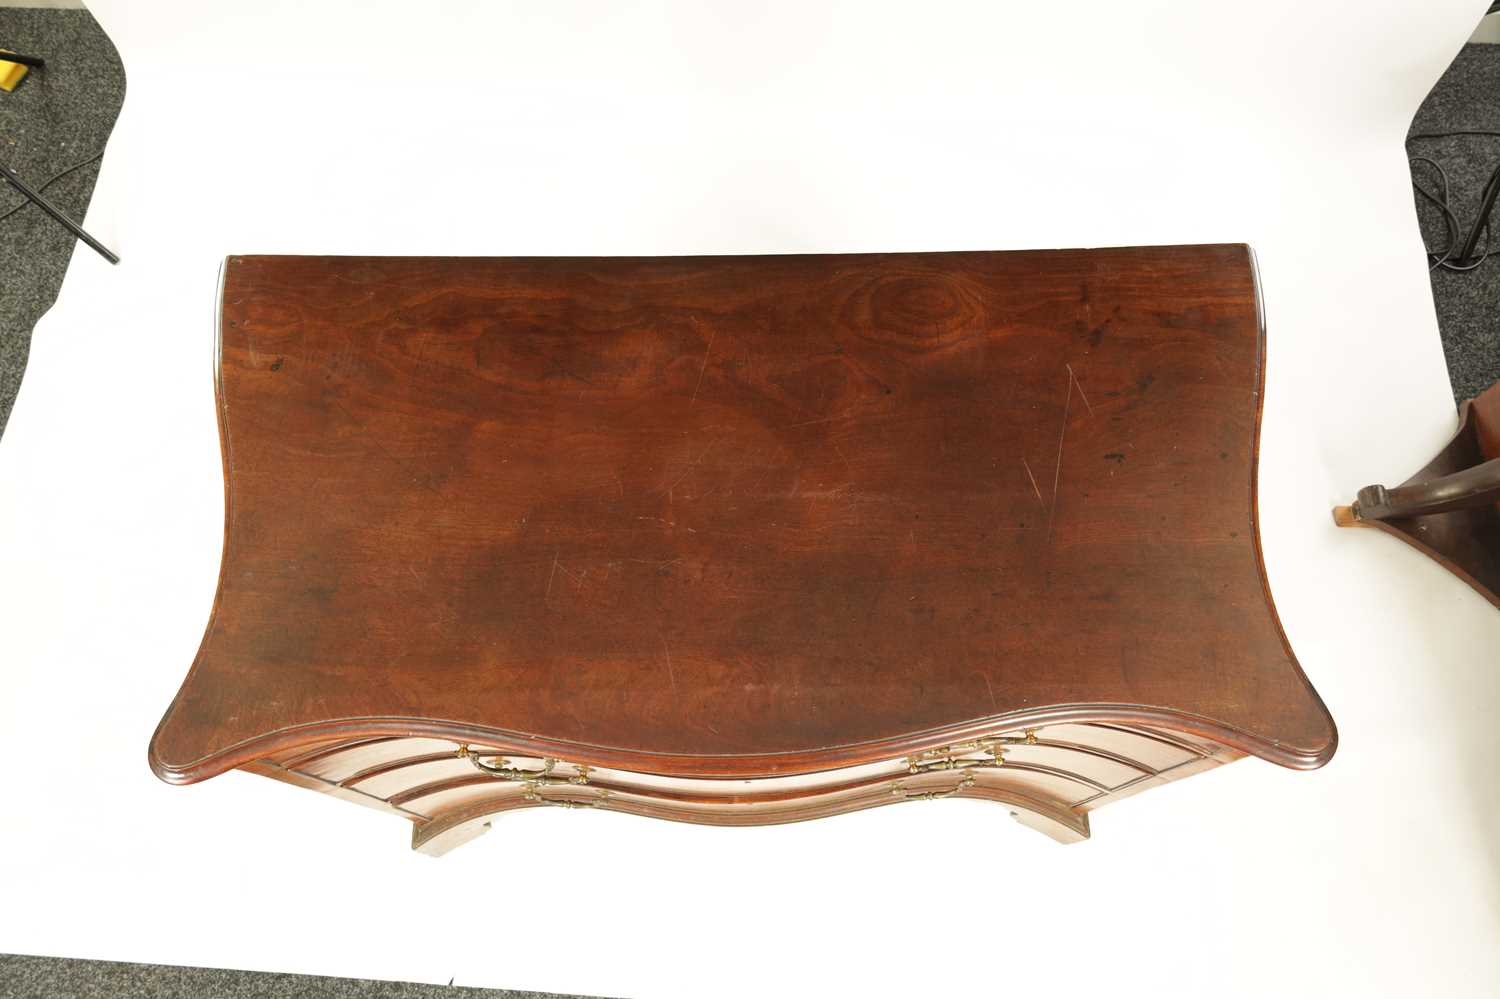 A FINE GEORGE III LOW WAISTED MAHOGANY SERPENTINE CHEST OF DRAWERS - Image 7 of 7